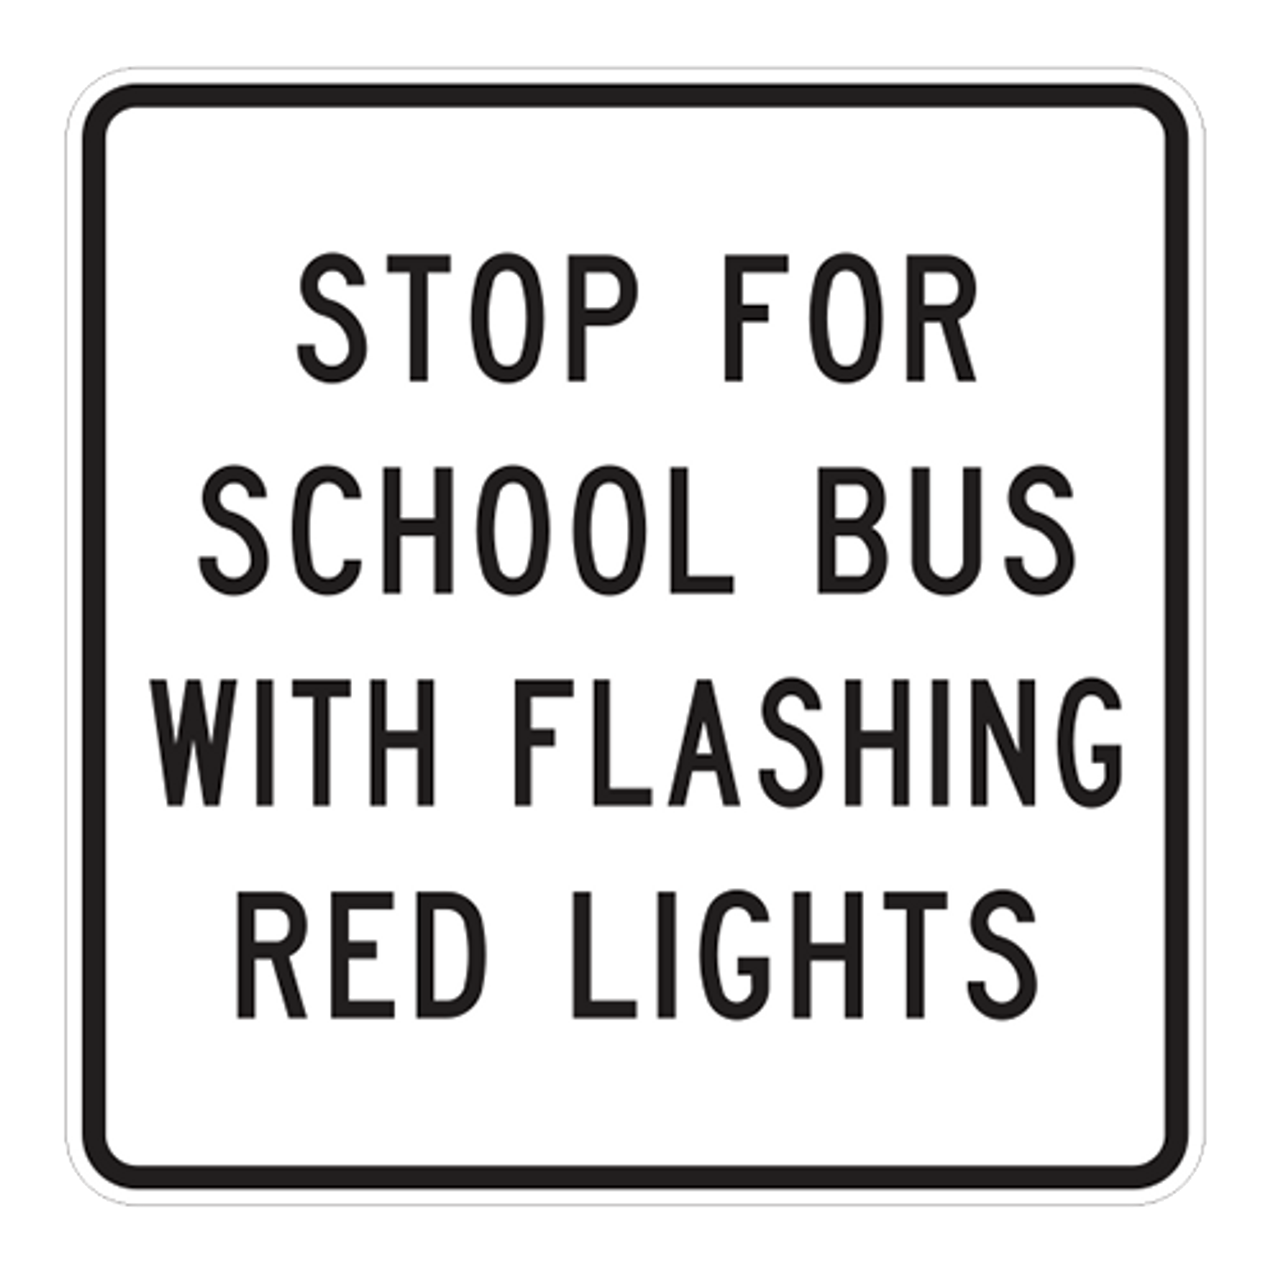 R16 1 Stop For School Bus With Flashing Red Lights 36x36 Us